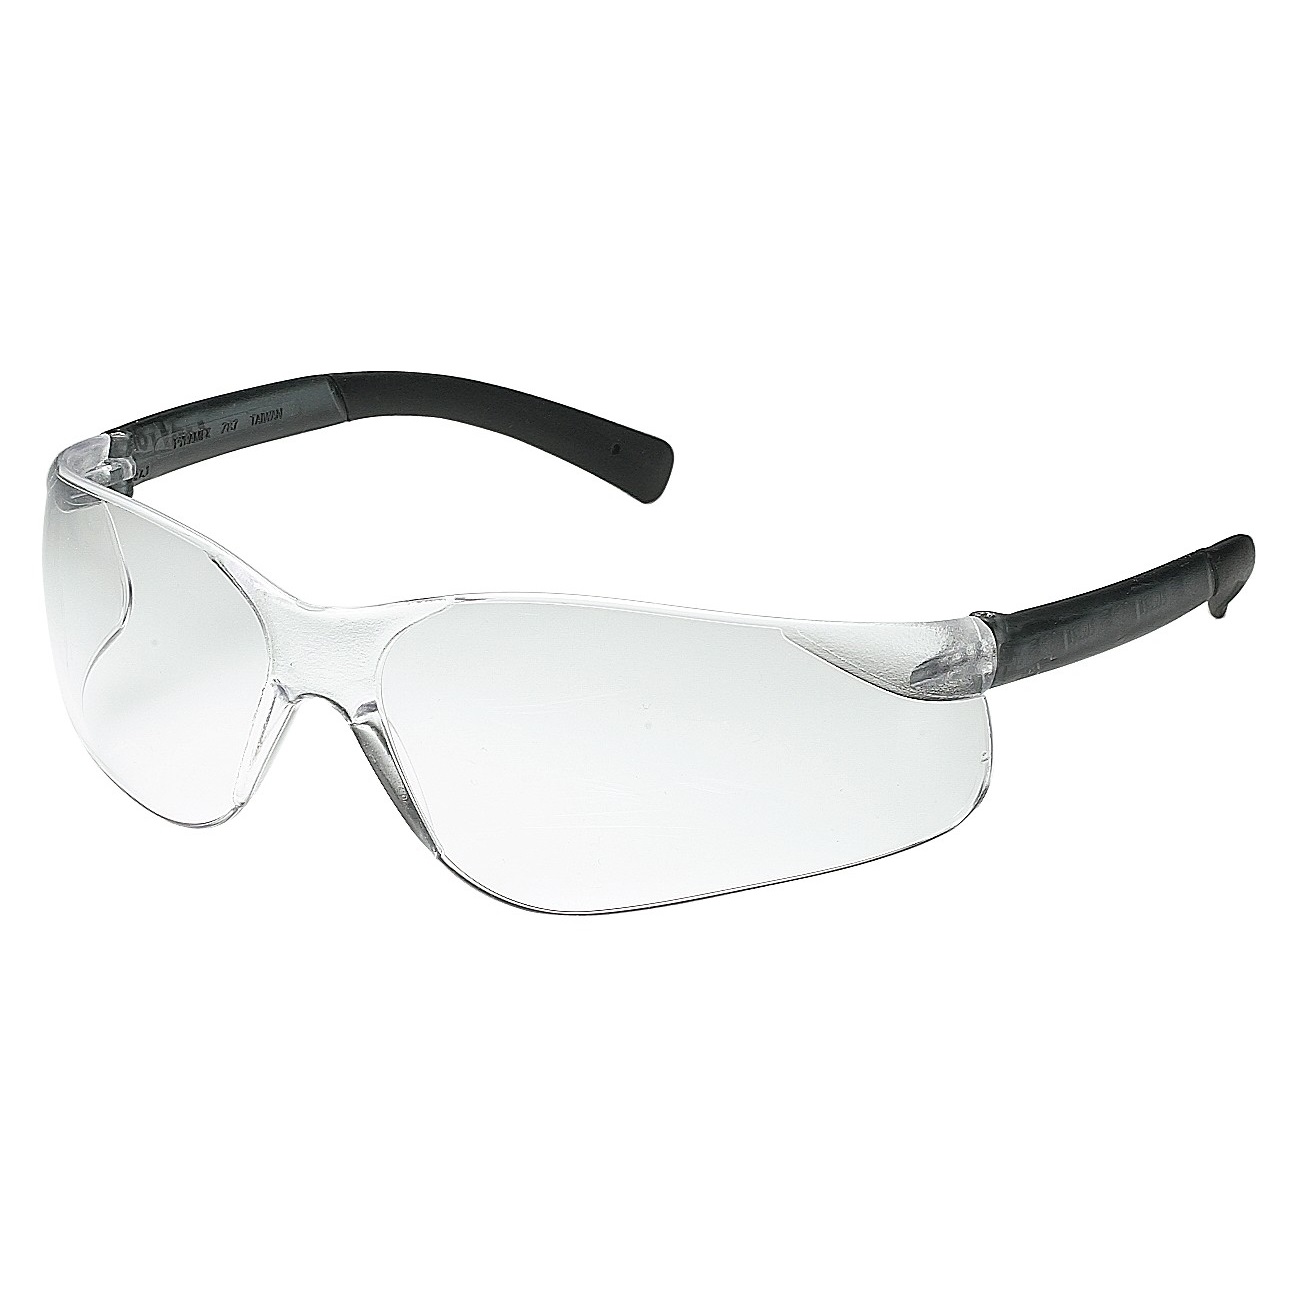 Galeton Sportster Safety Glasses with Fog Free Clear Lens